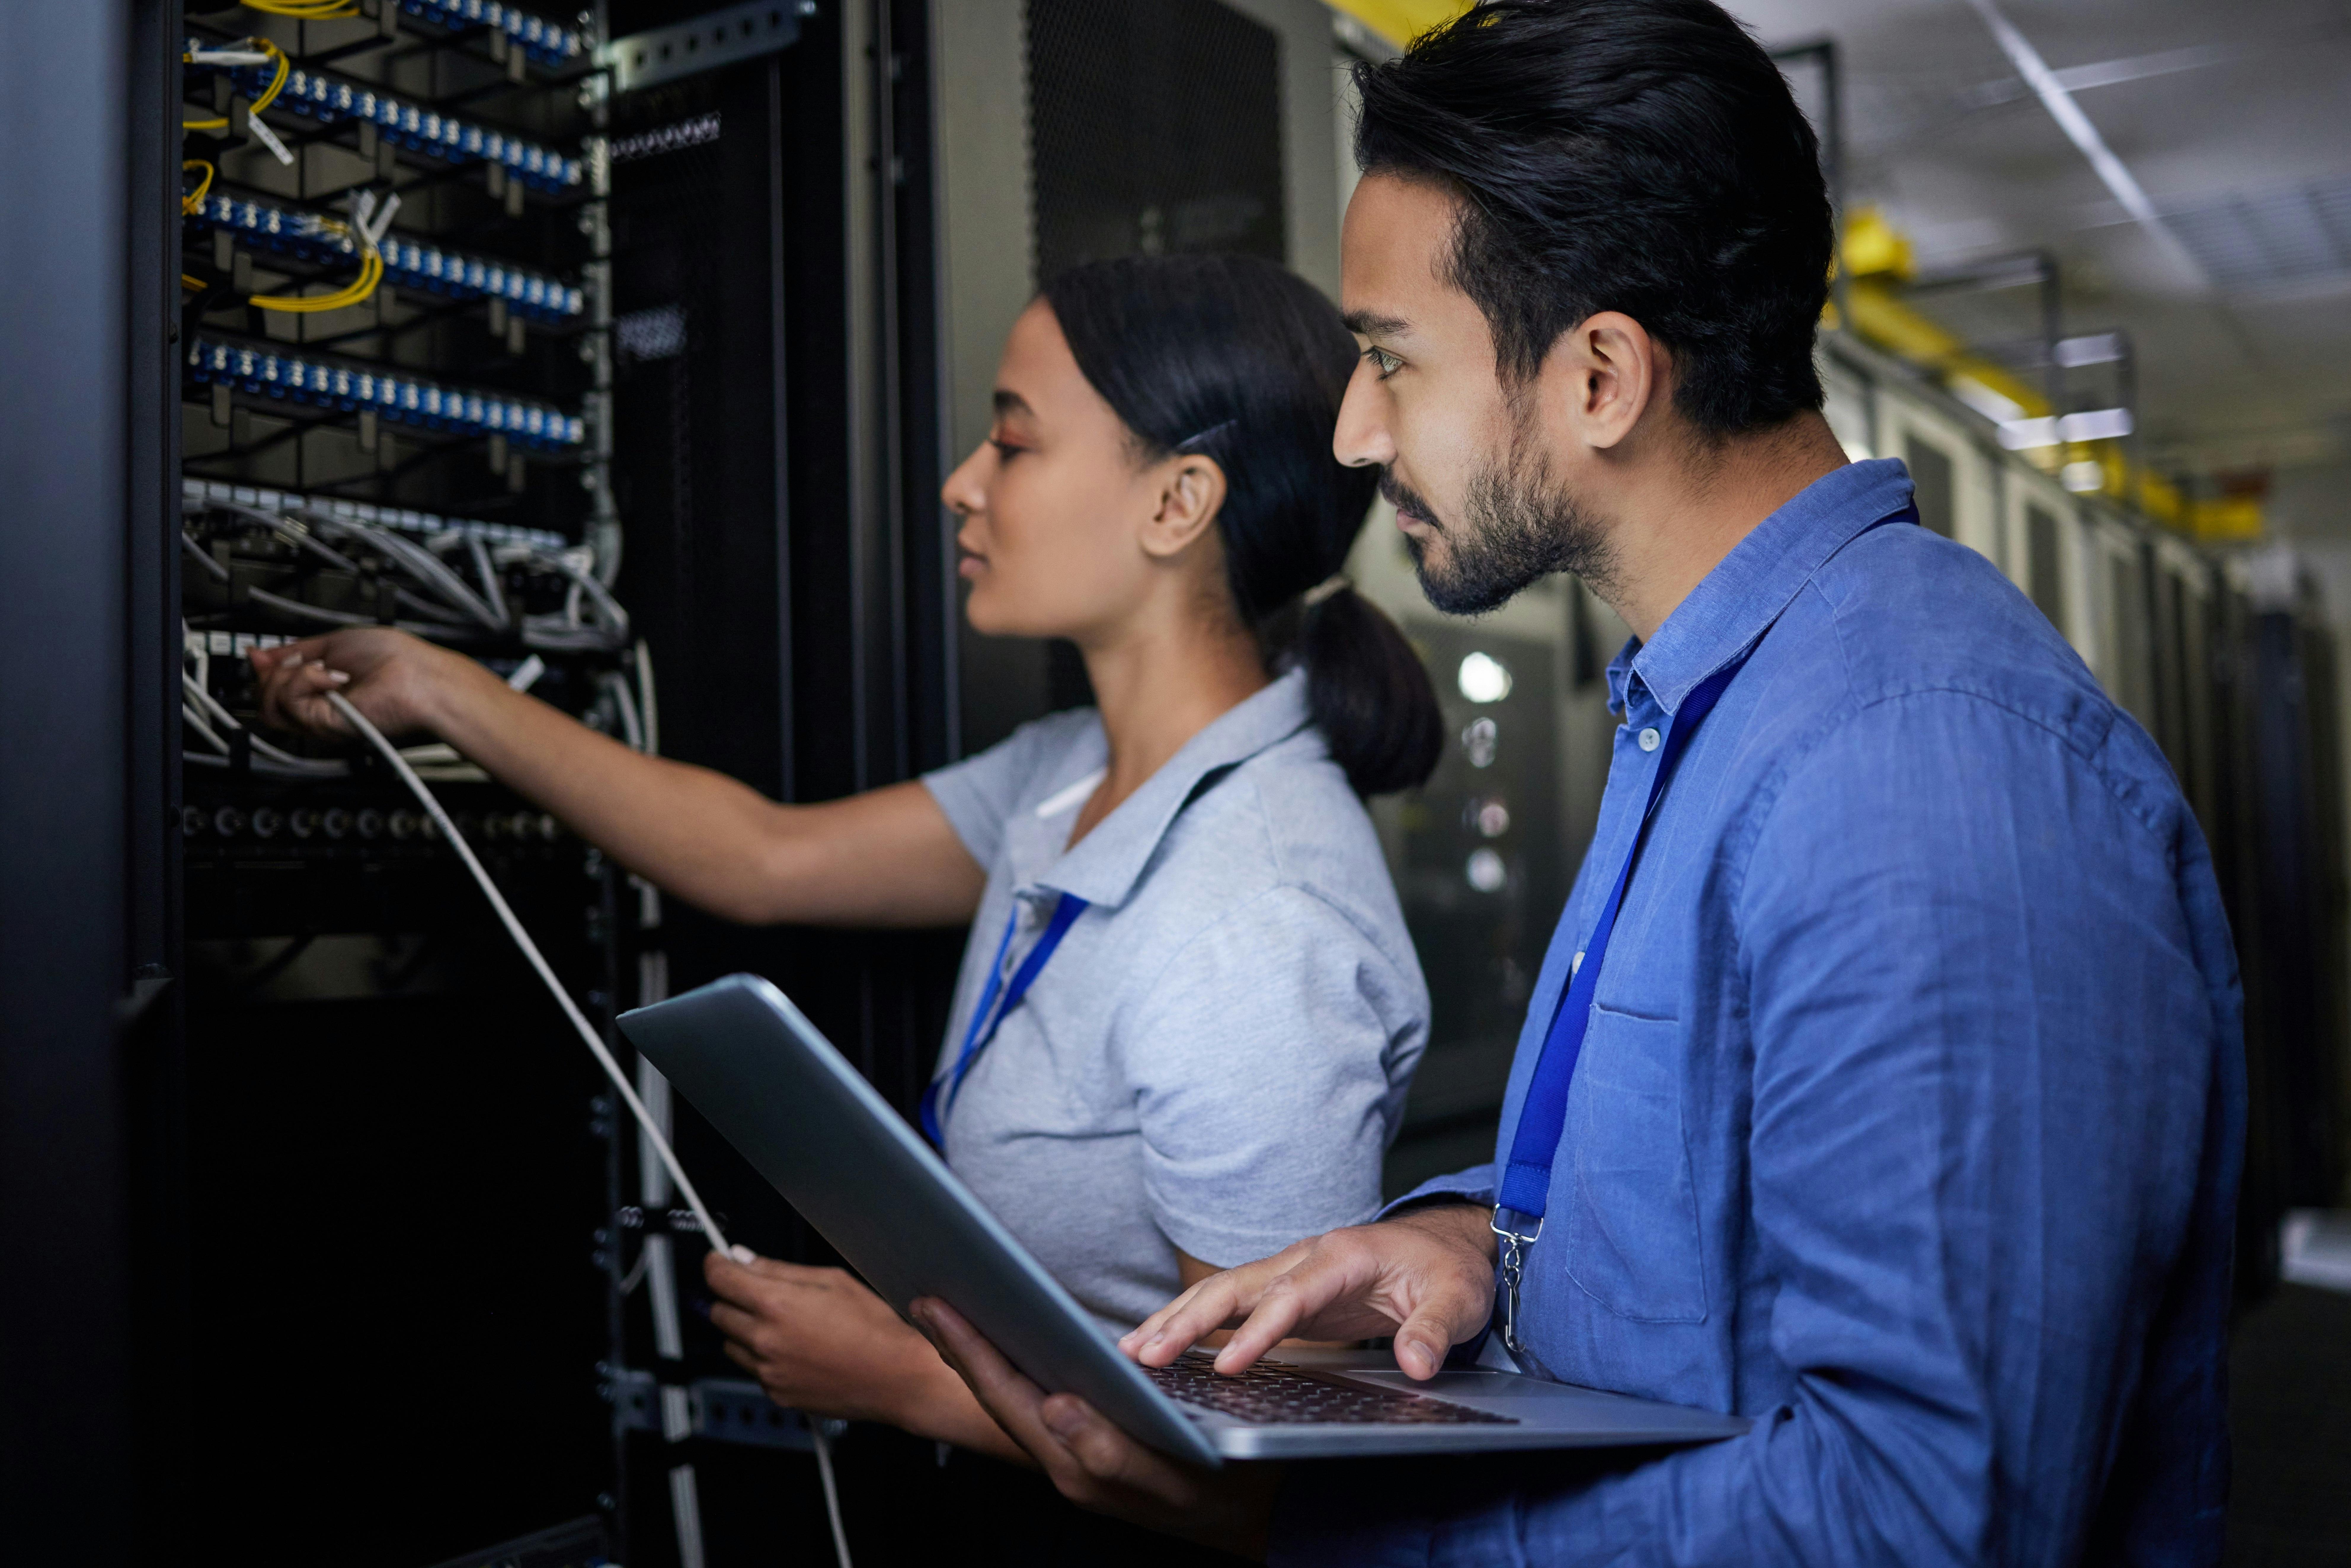 Two people working in a server room